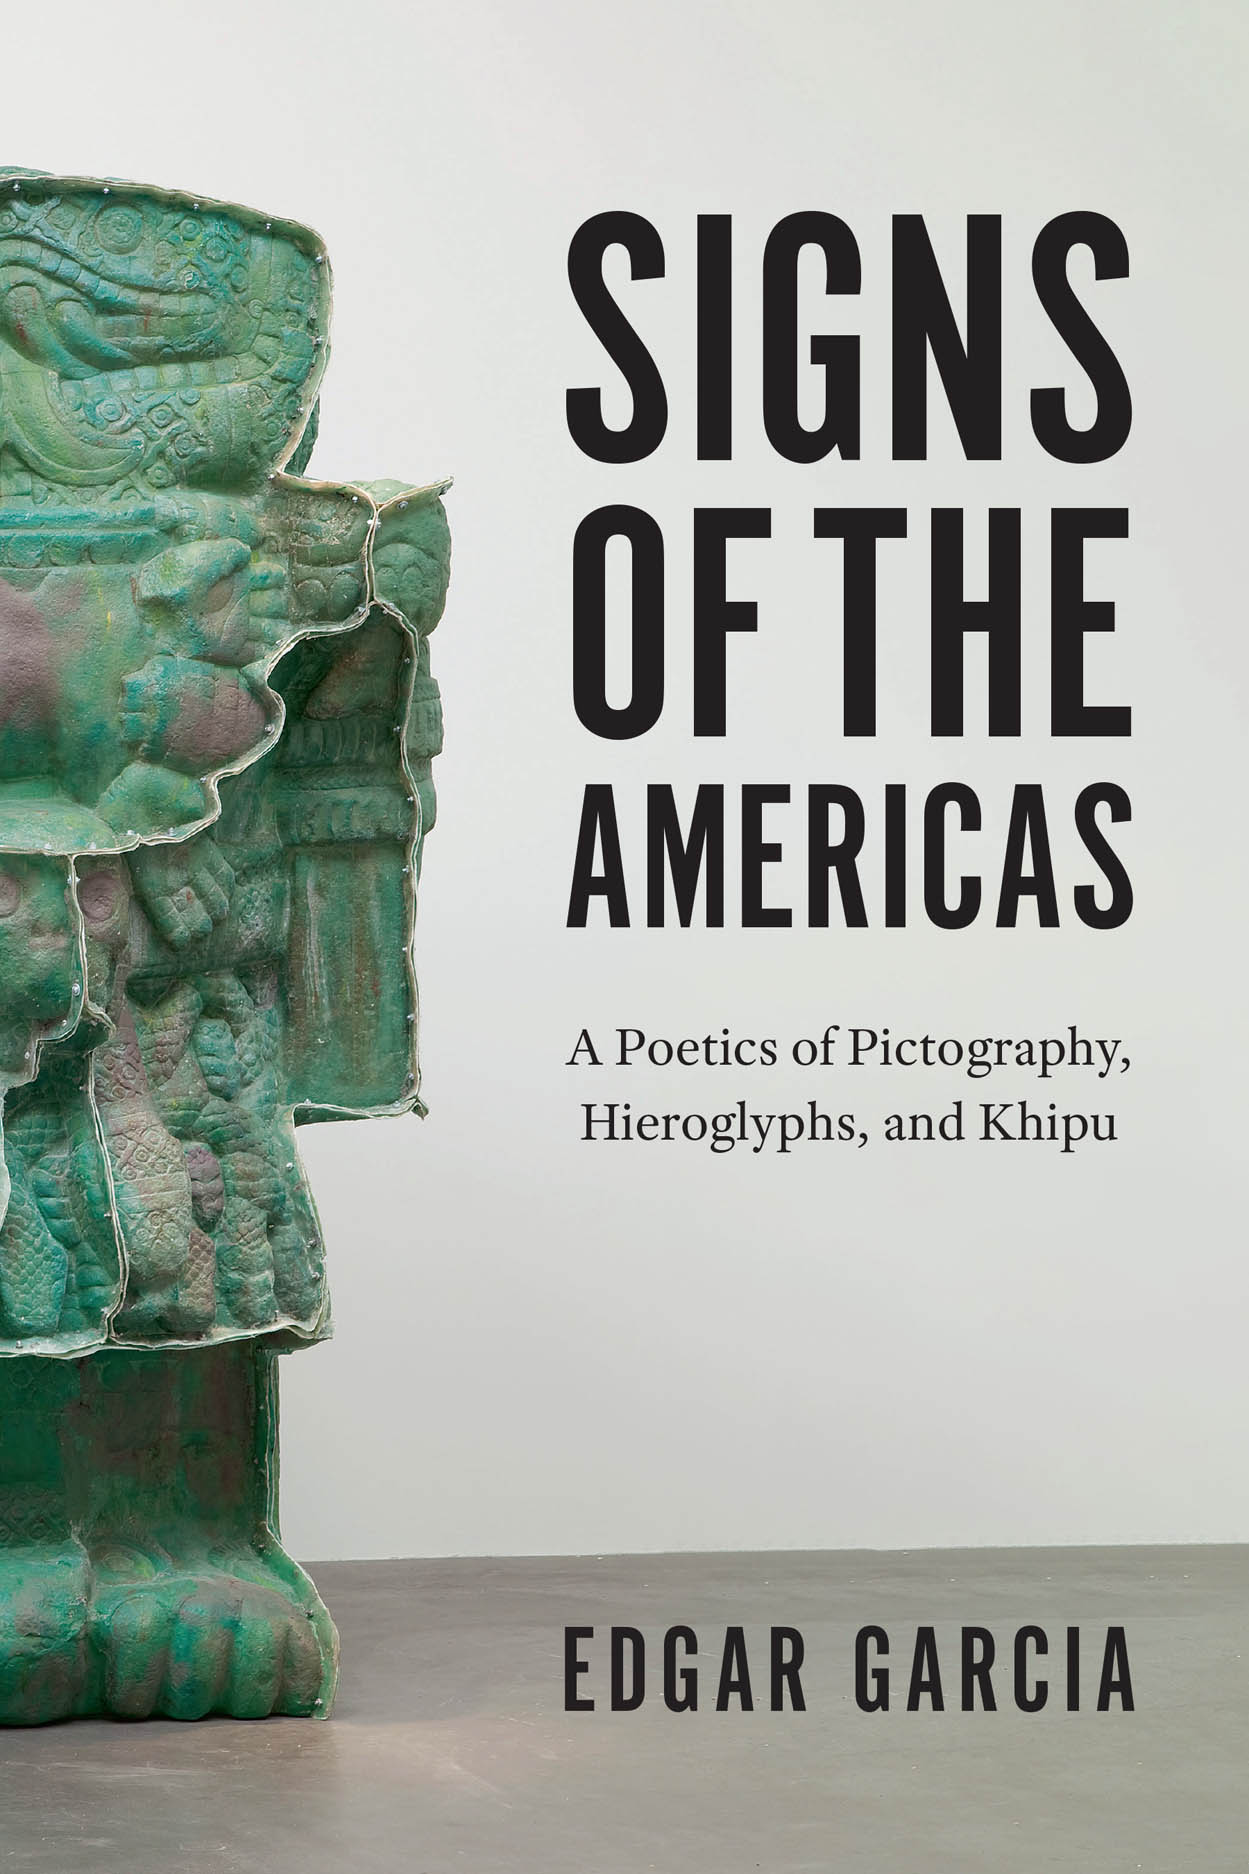 Review: Literature and Arts of the Americas